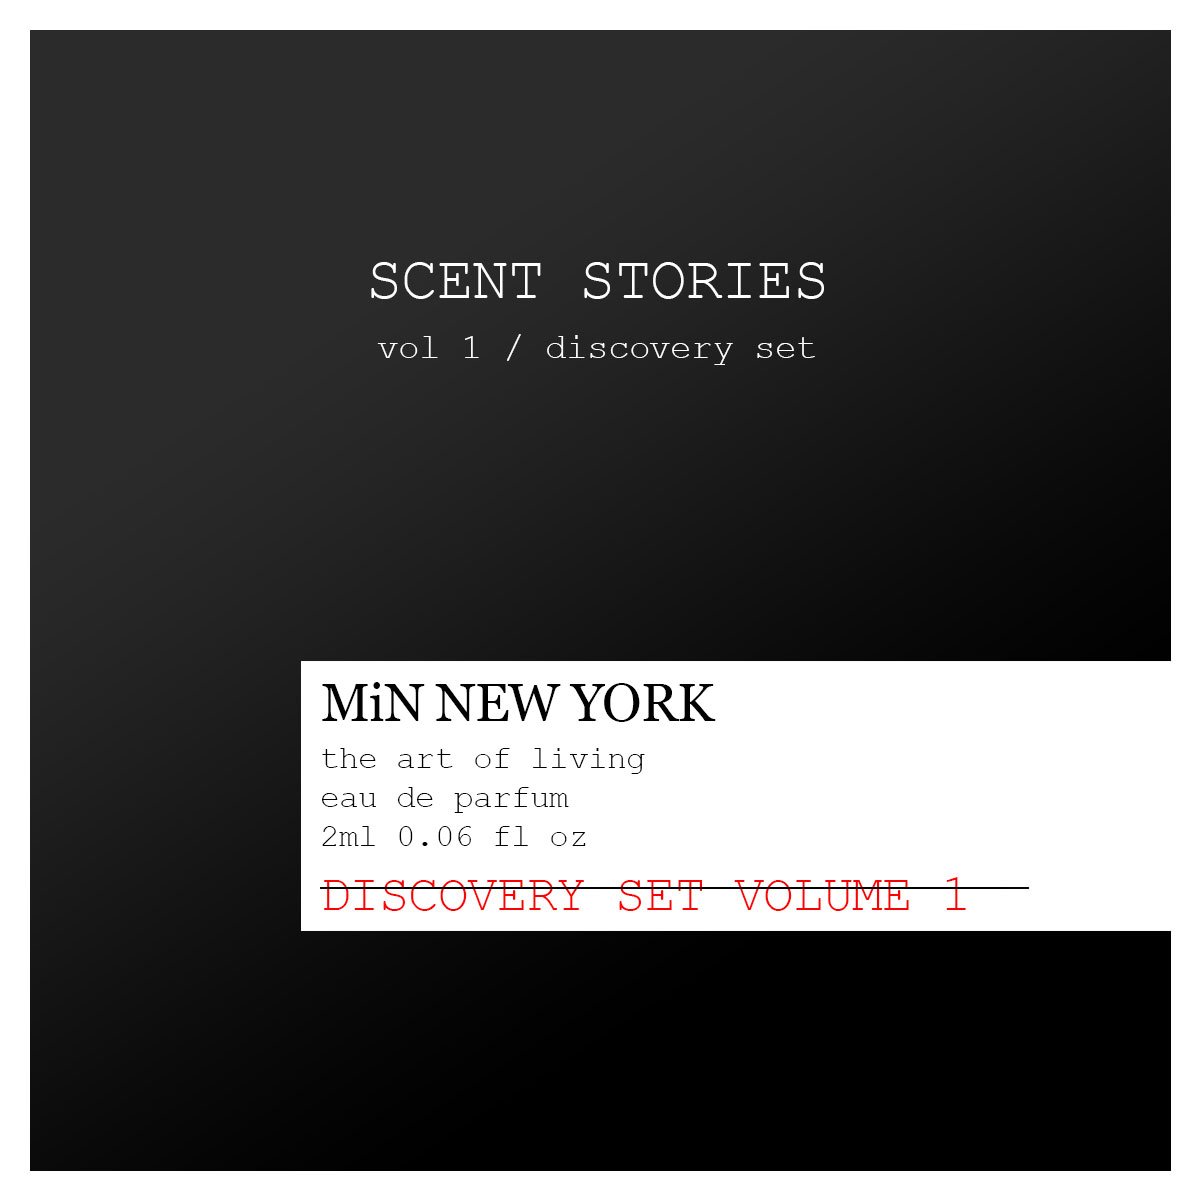 SCENT STORIES DISCOVERY SET, VOL. 1